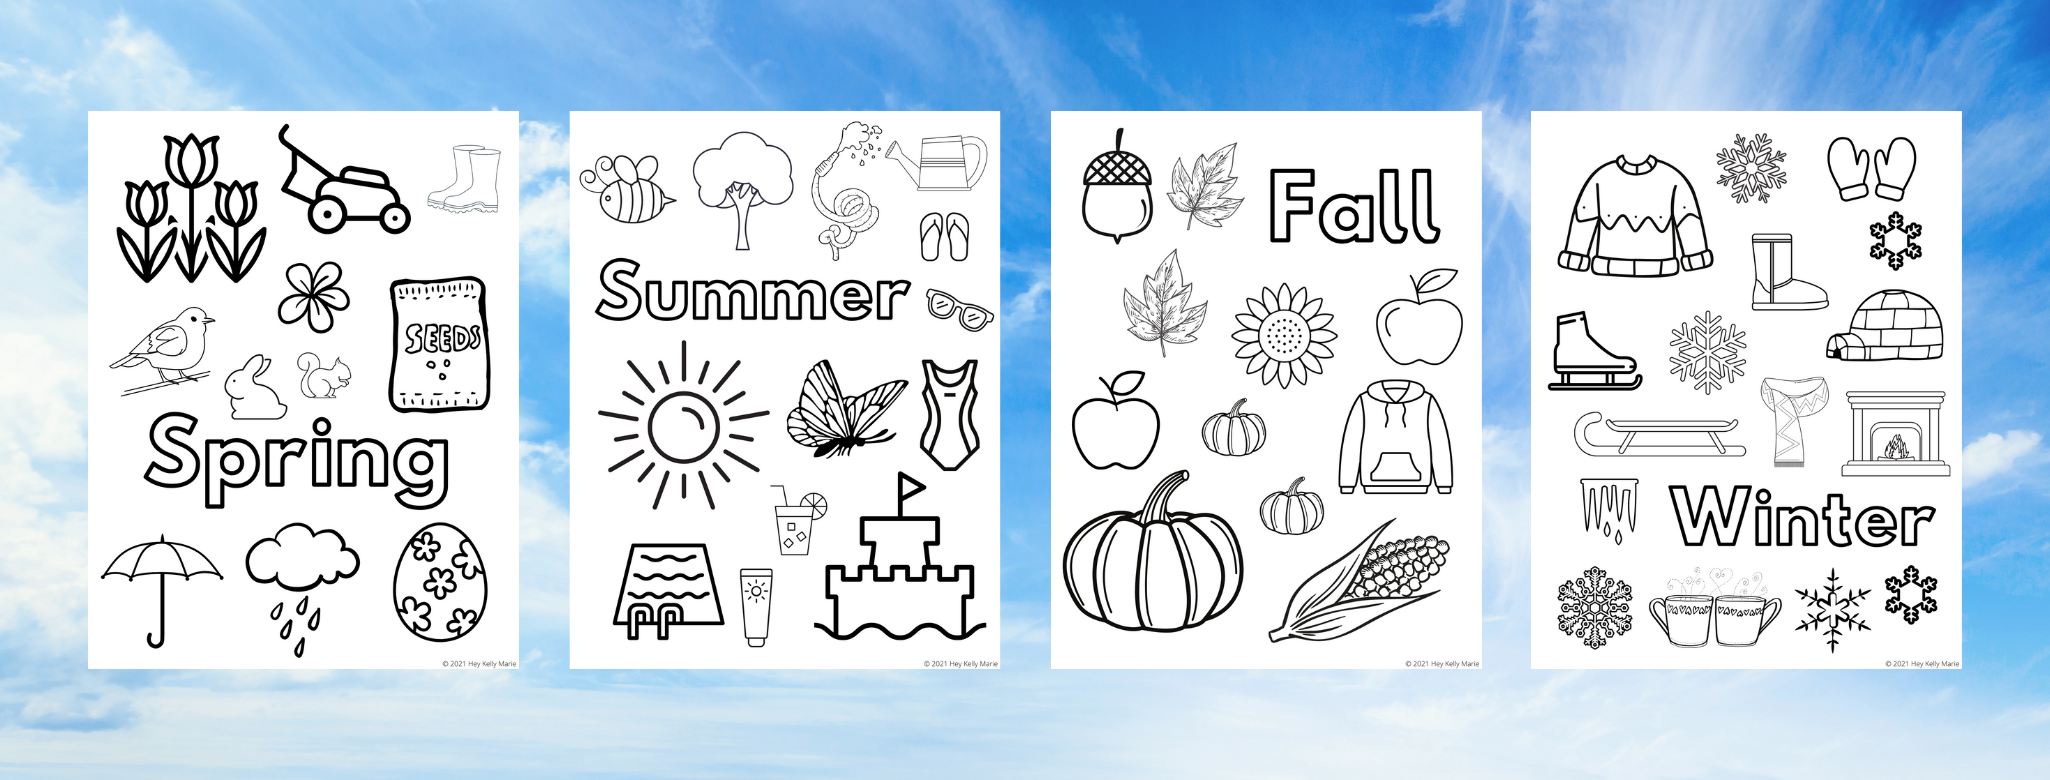 Free Four Seasons Coloring Pages to Learn About Weather  